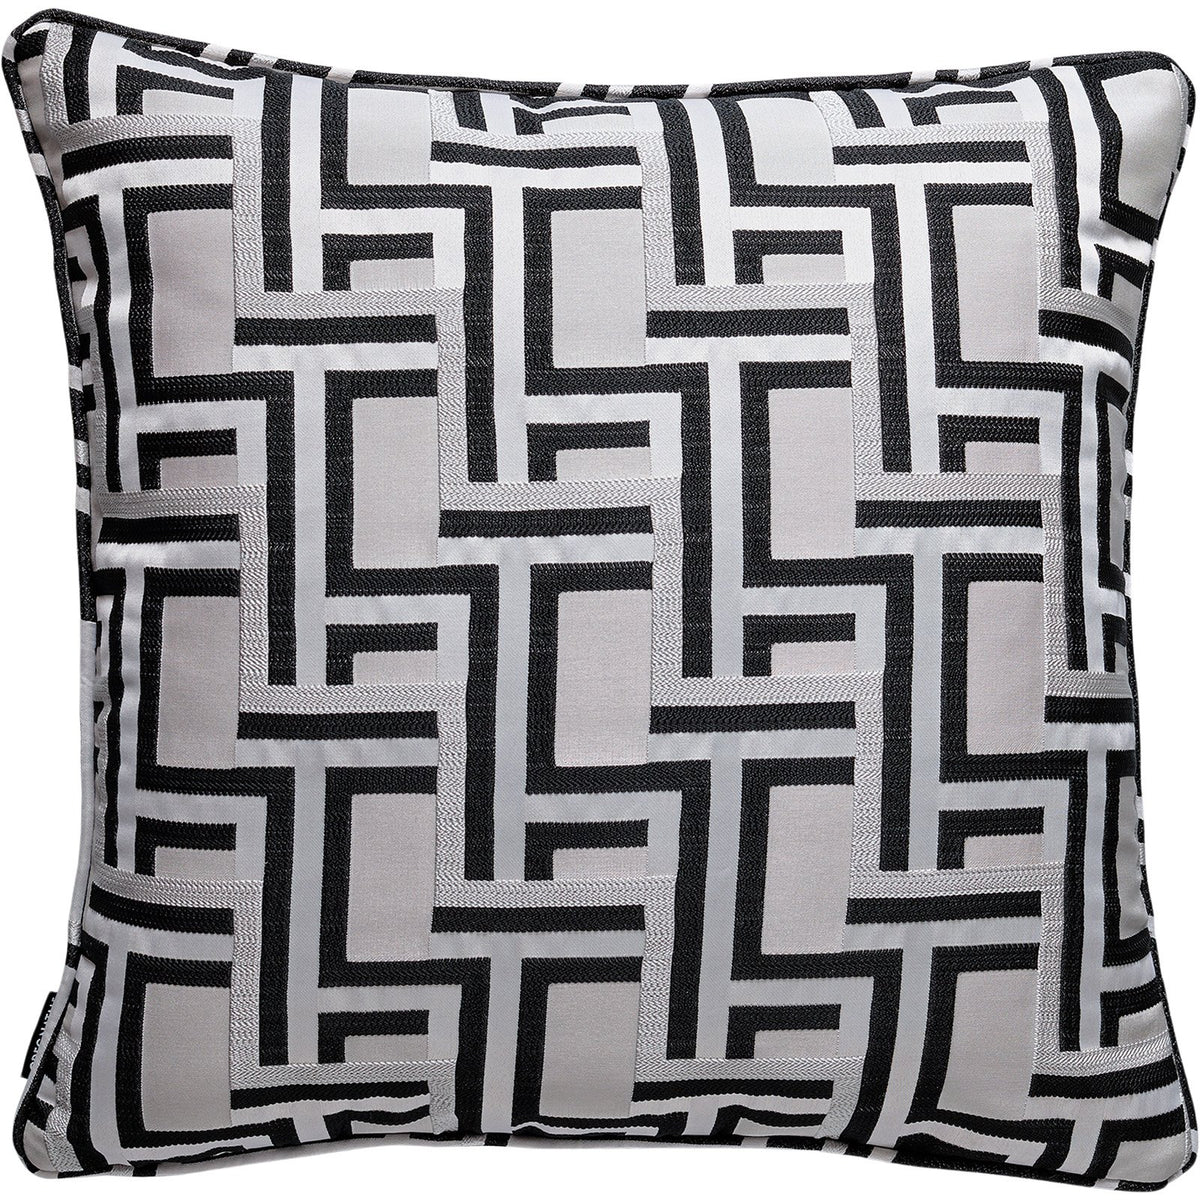 Forbes Square Cushion, Grey Cover